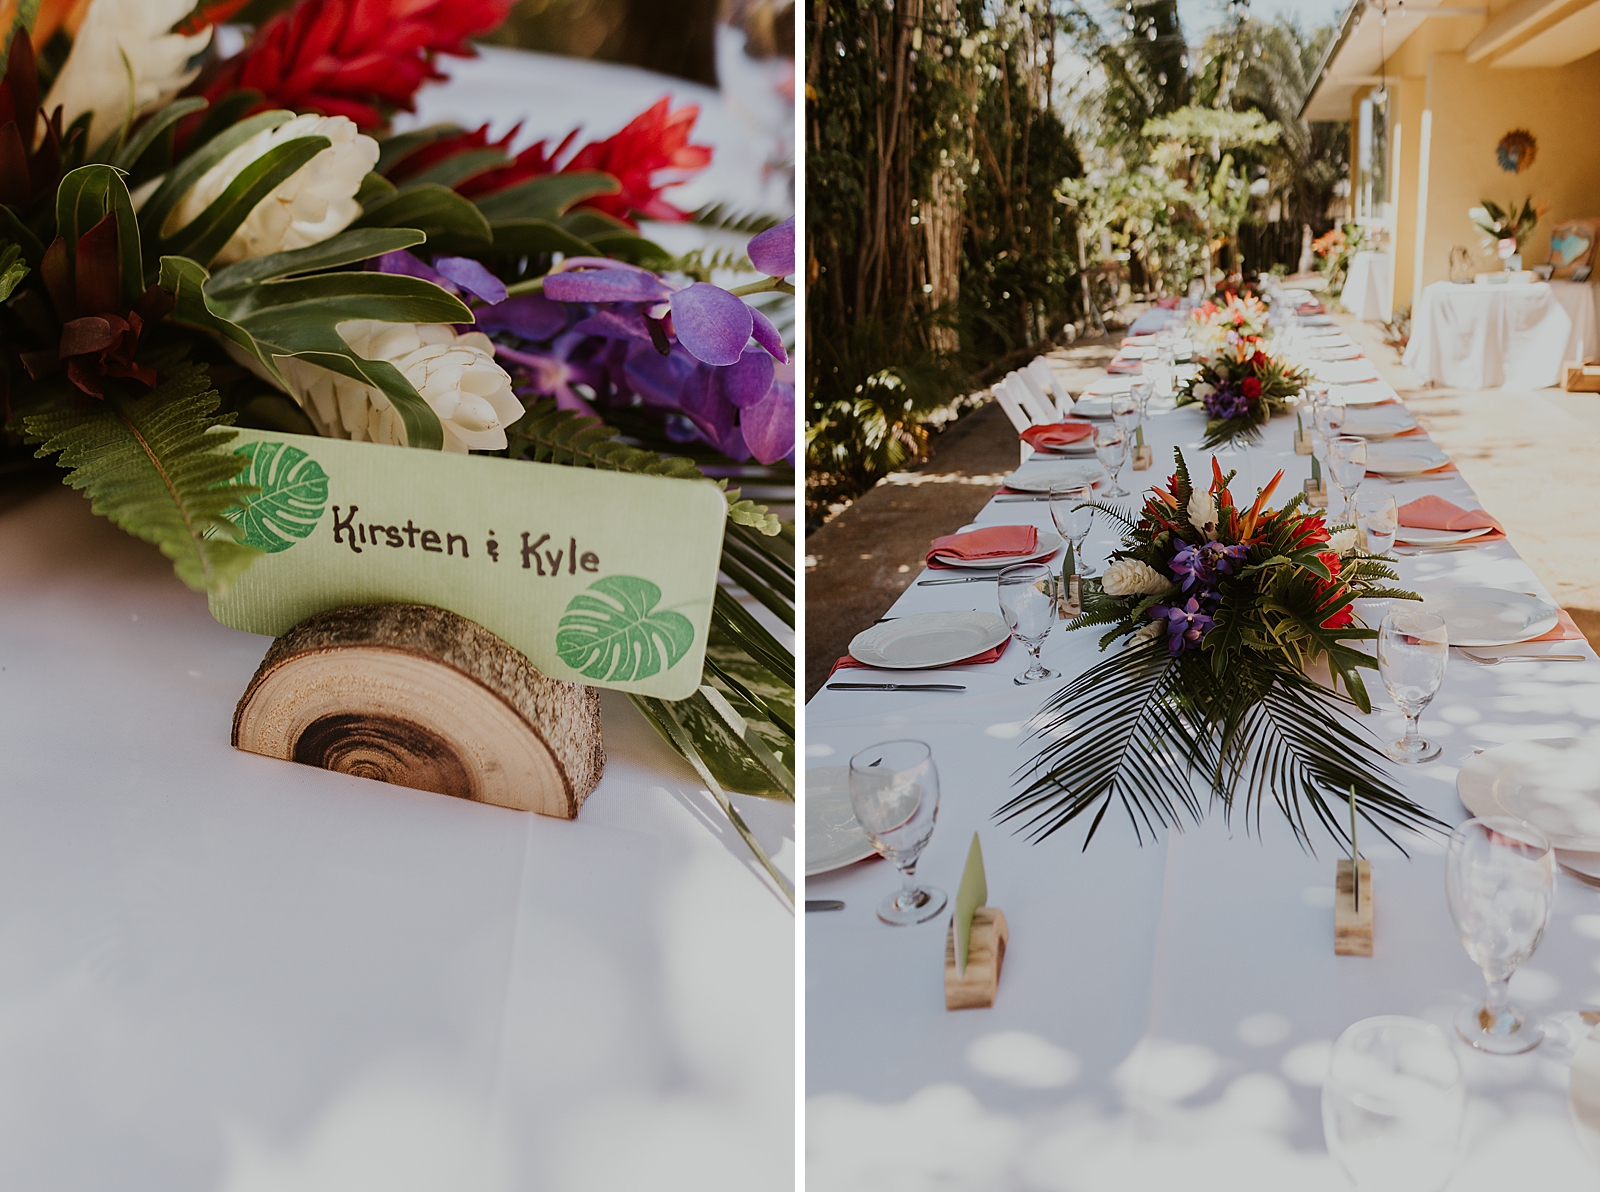 Detail shot of Bride and Groom name on sweetheart table and long rectangle table with tropical centerpieces